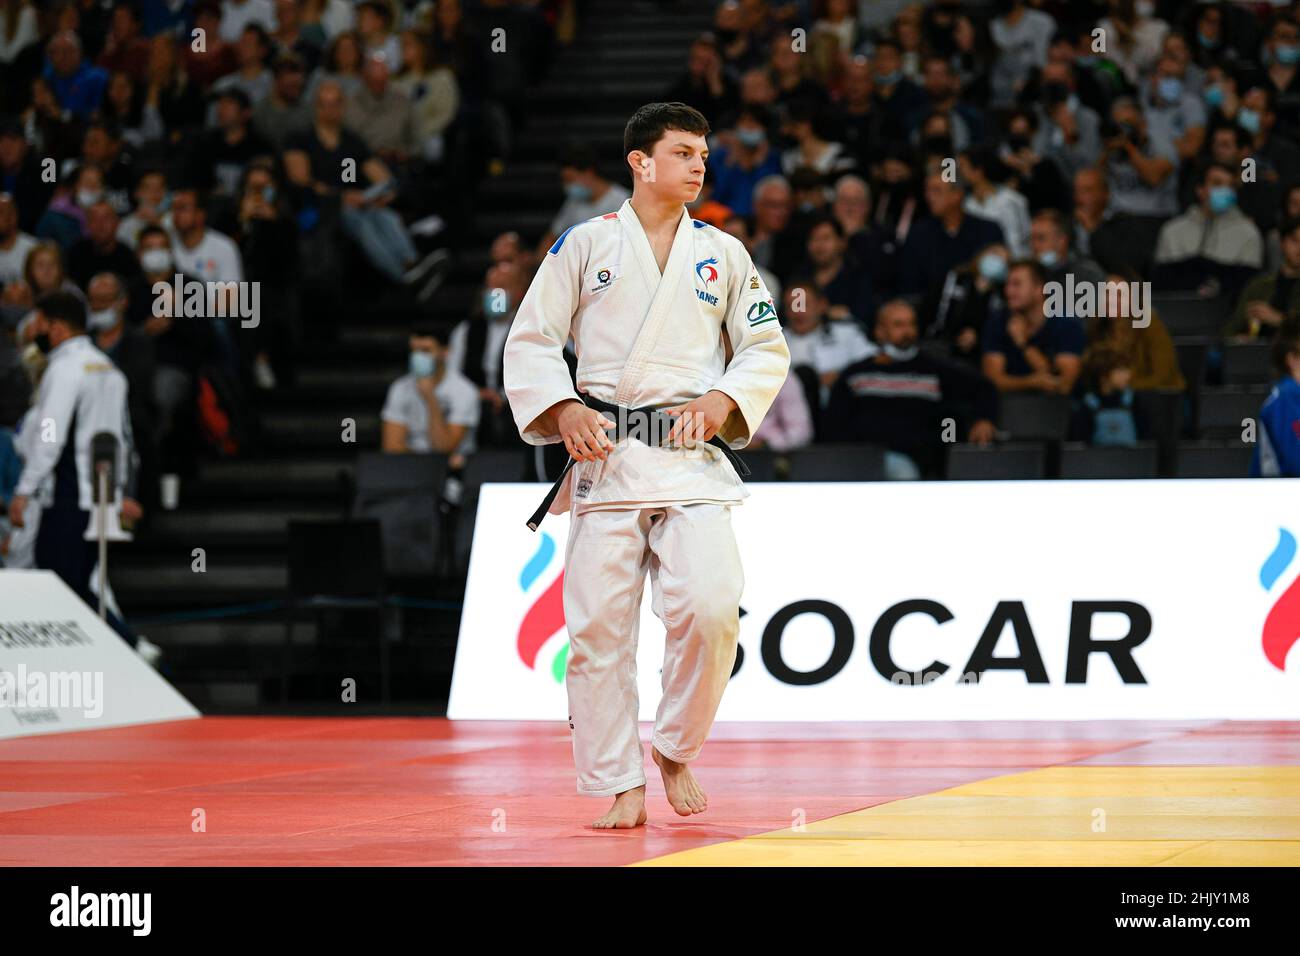 Men -60 kg, Romain VALADIER PICARD of France Bronze medal competes during the Paris Grand Slam 2021, Judo event on October 16, 2021 at AccorHotels Are Stock Photo